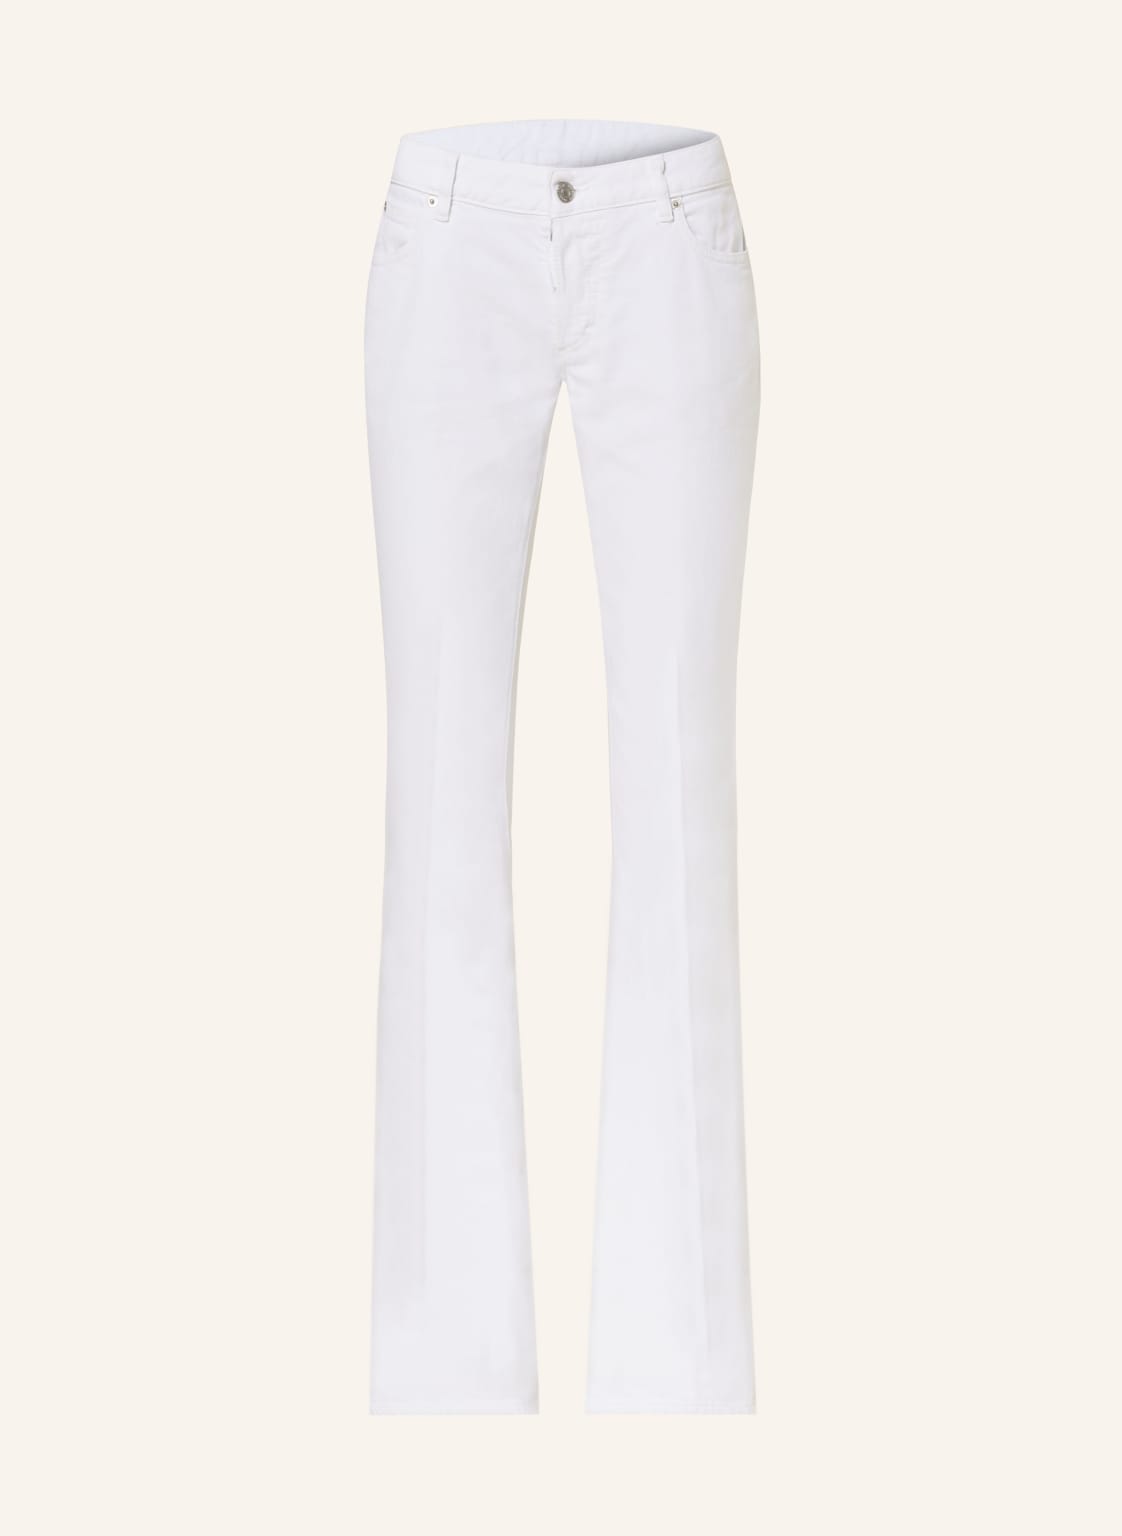 dsquared2 Flared Jeans weiss von Dsquared2